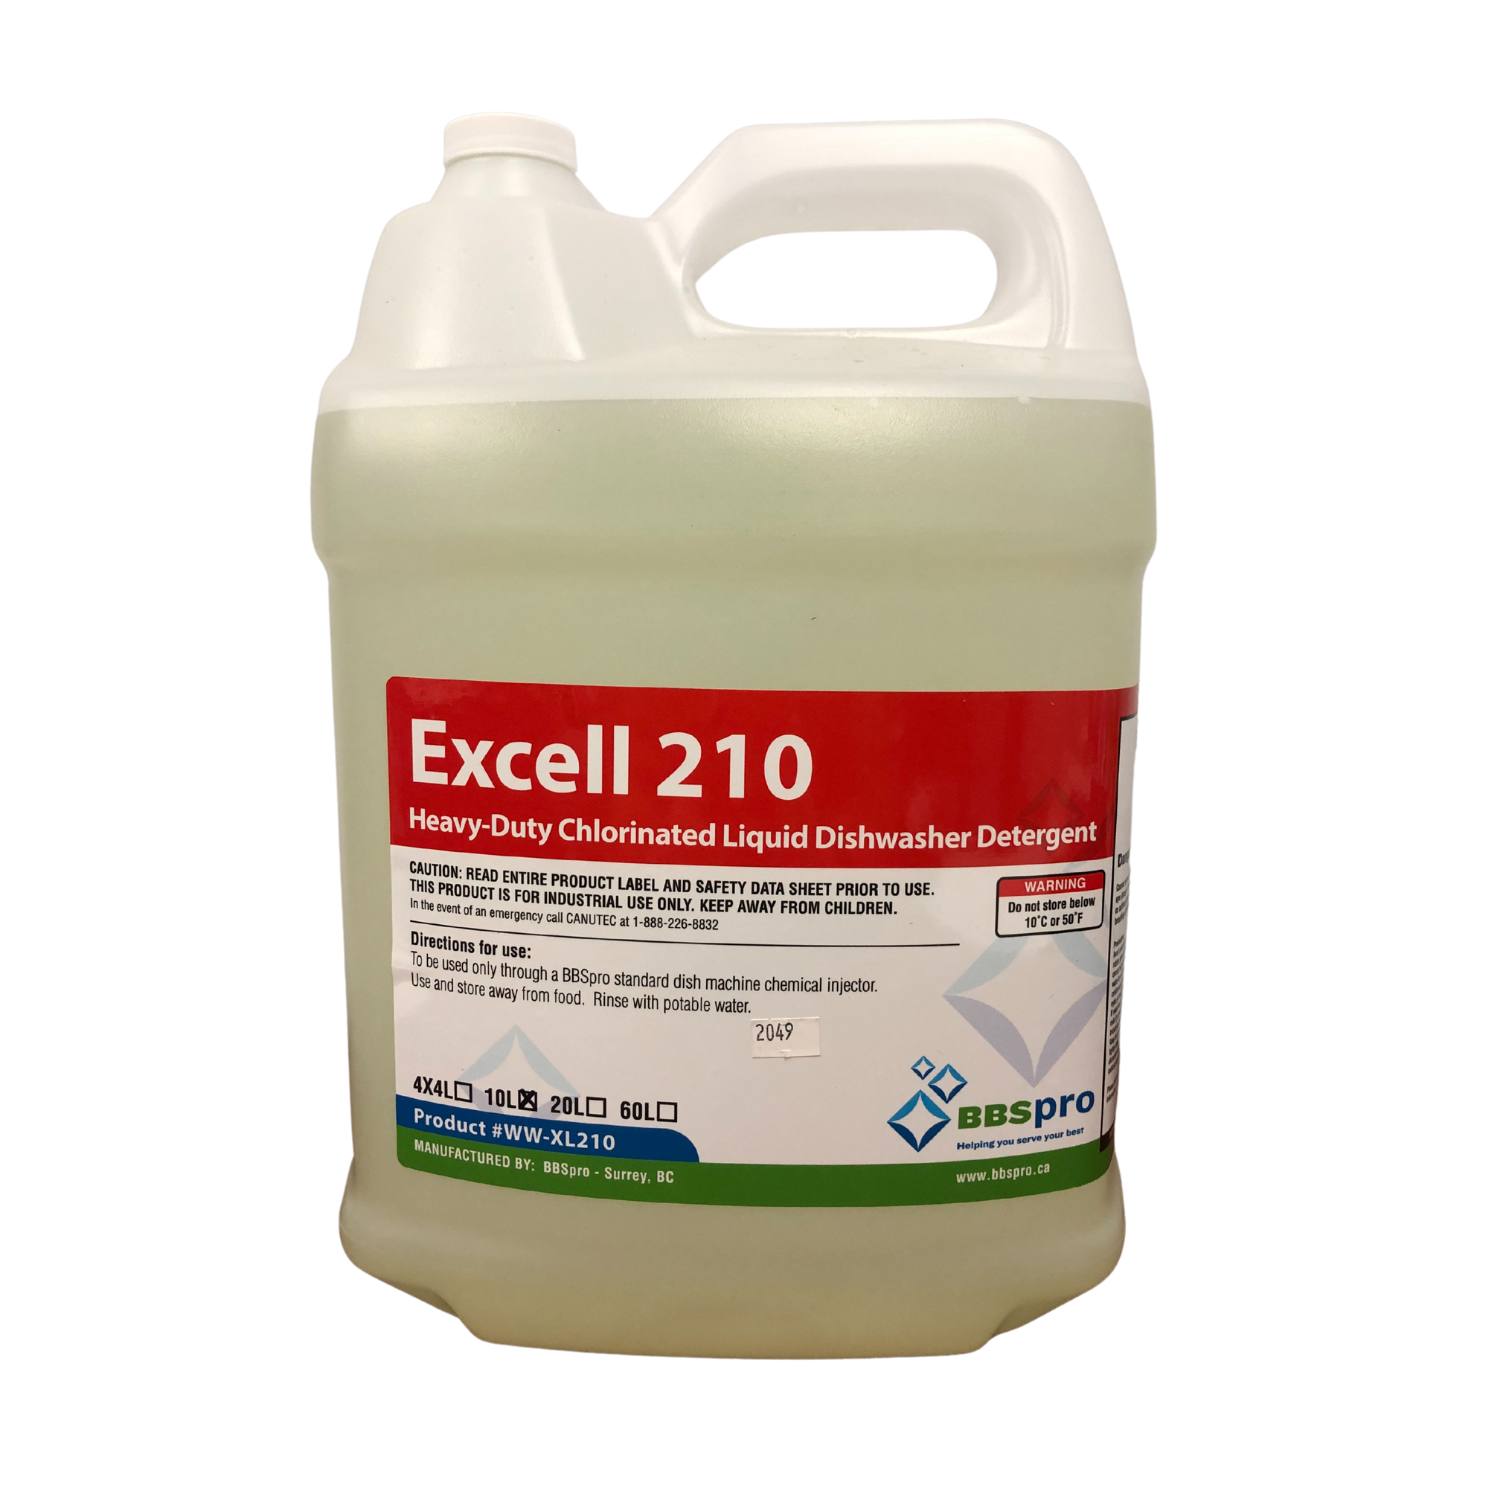 Excell 210